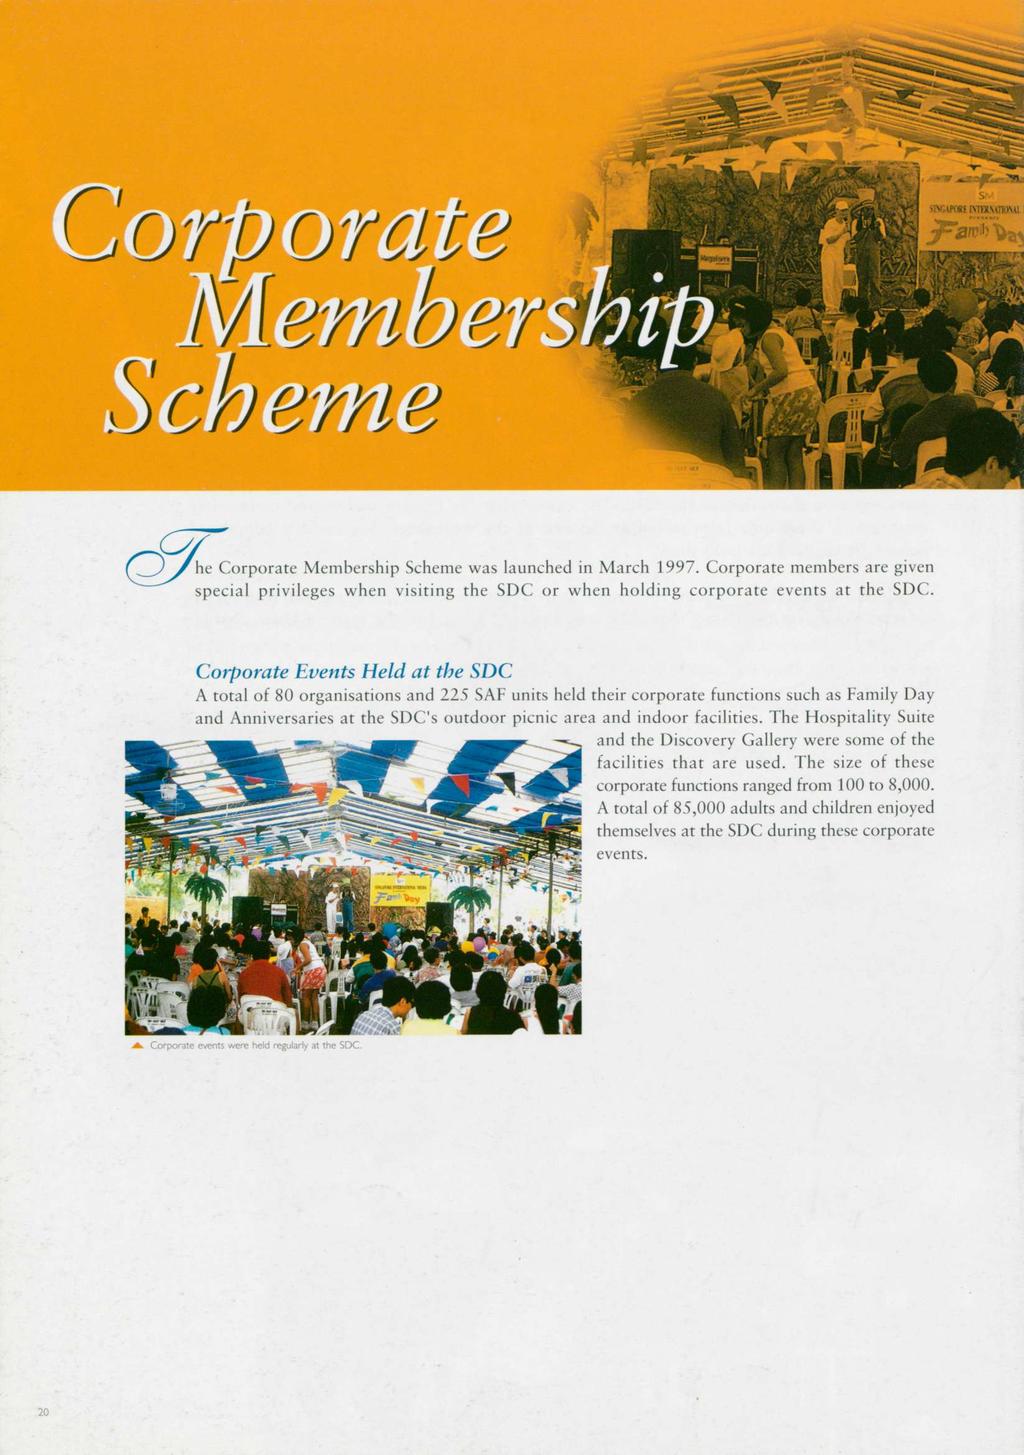 Corporate j Membership Scheme The Corporate Membership Scheme was launched in March 1997.